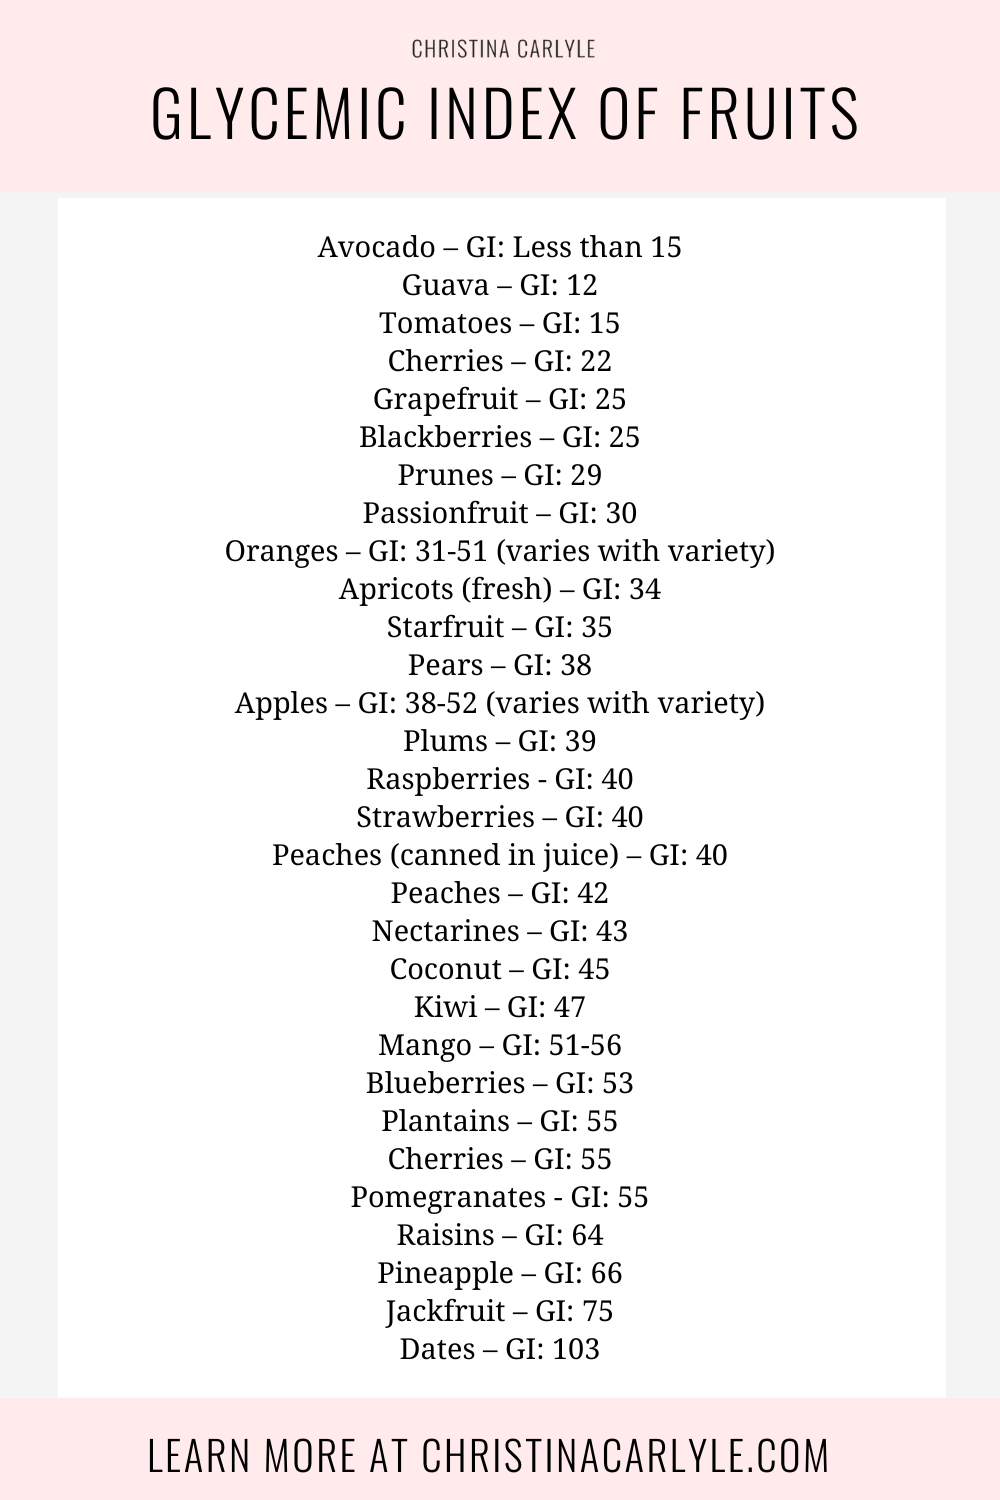 a list of 30 fruits and their rank on the glycemic index